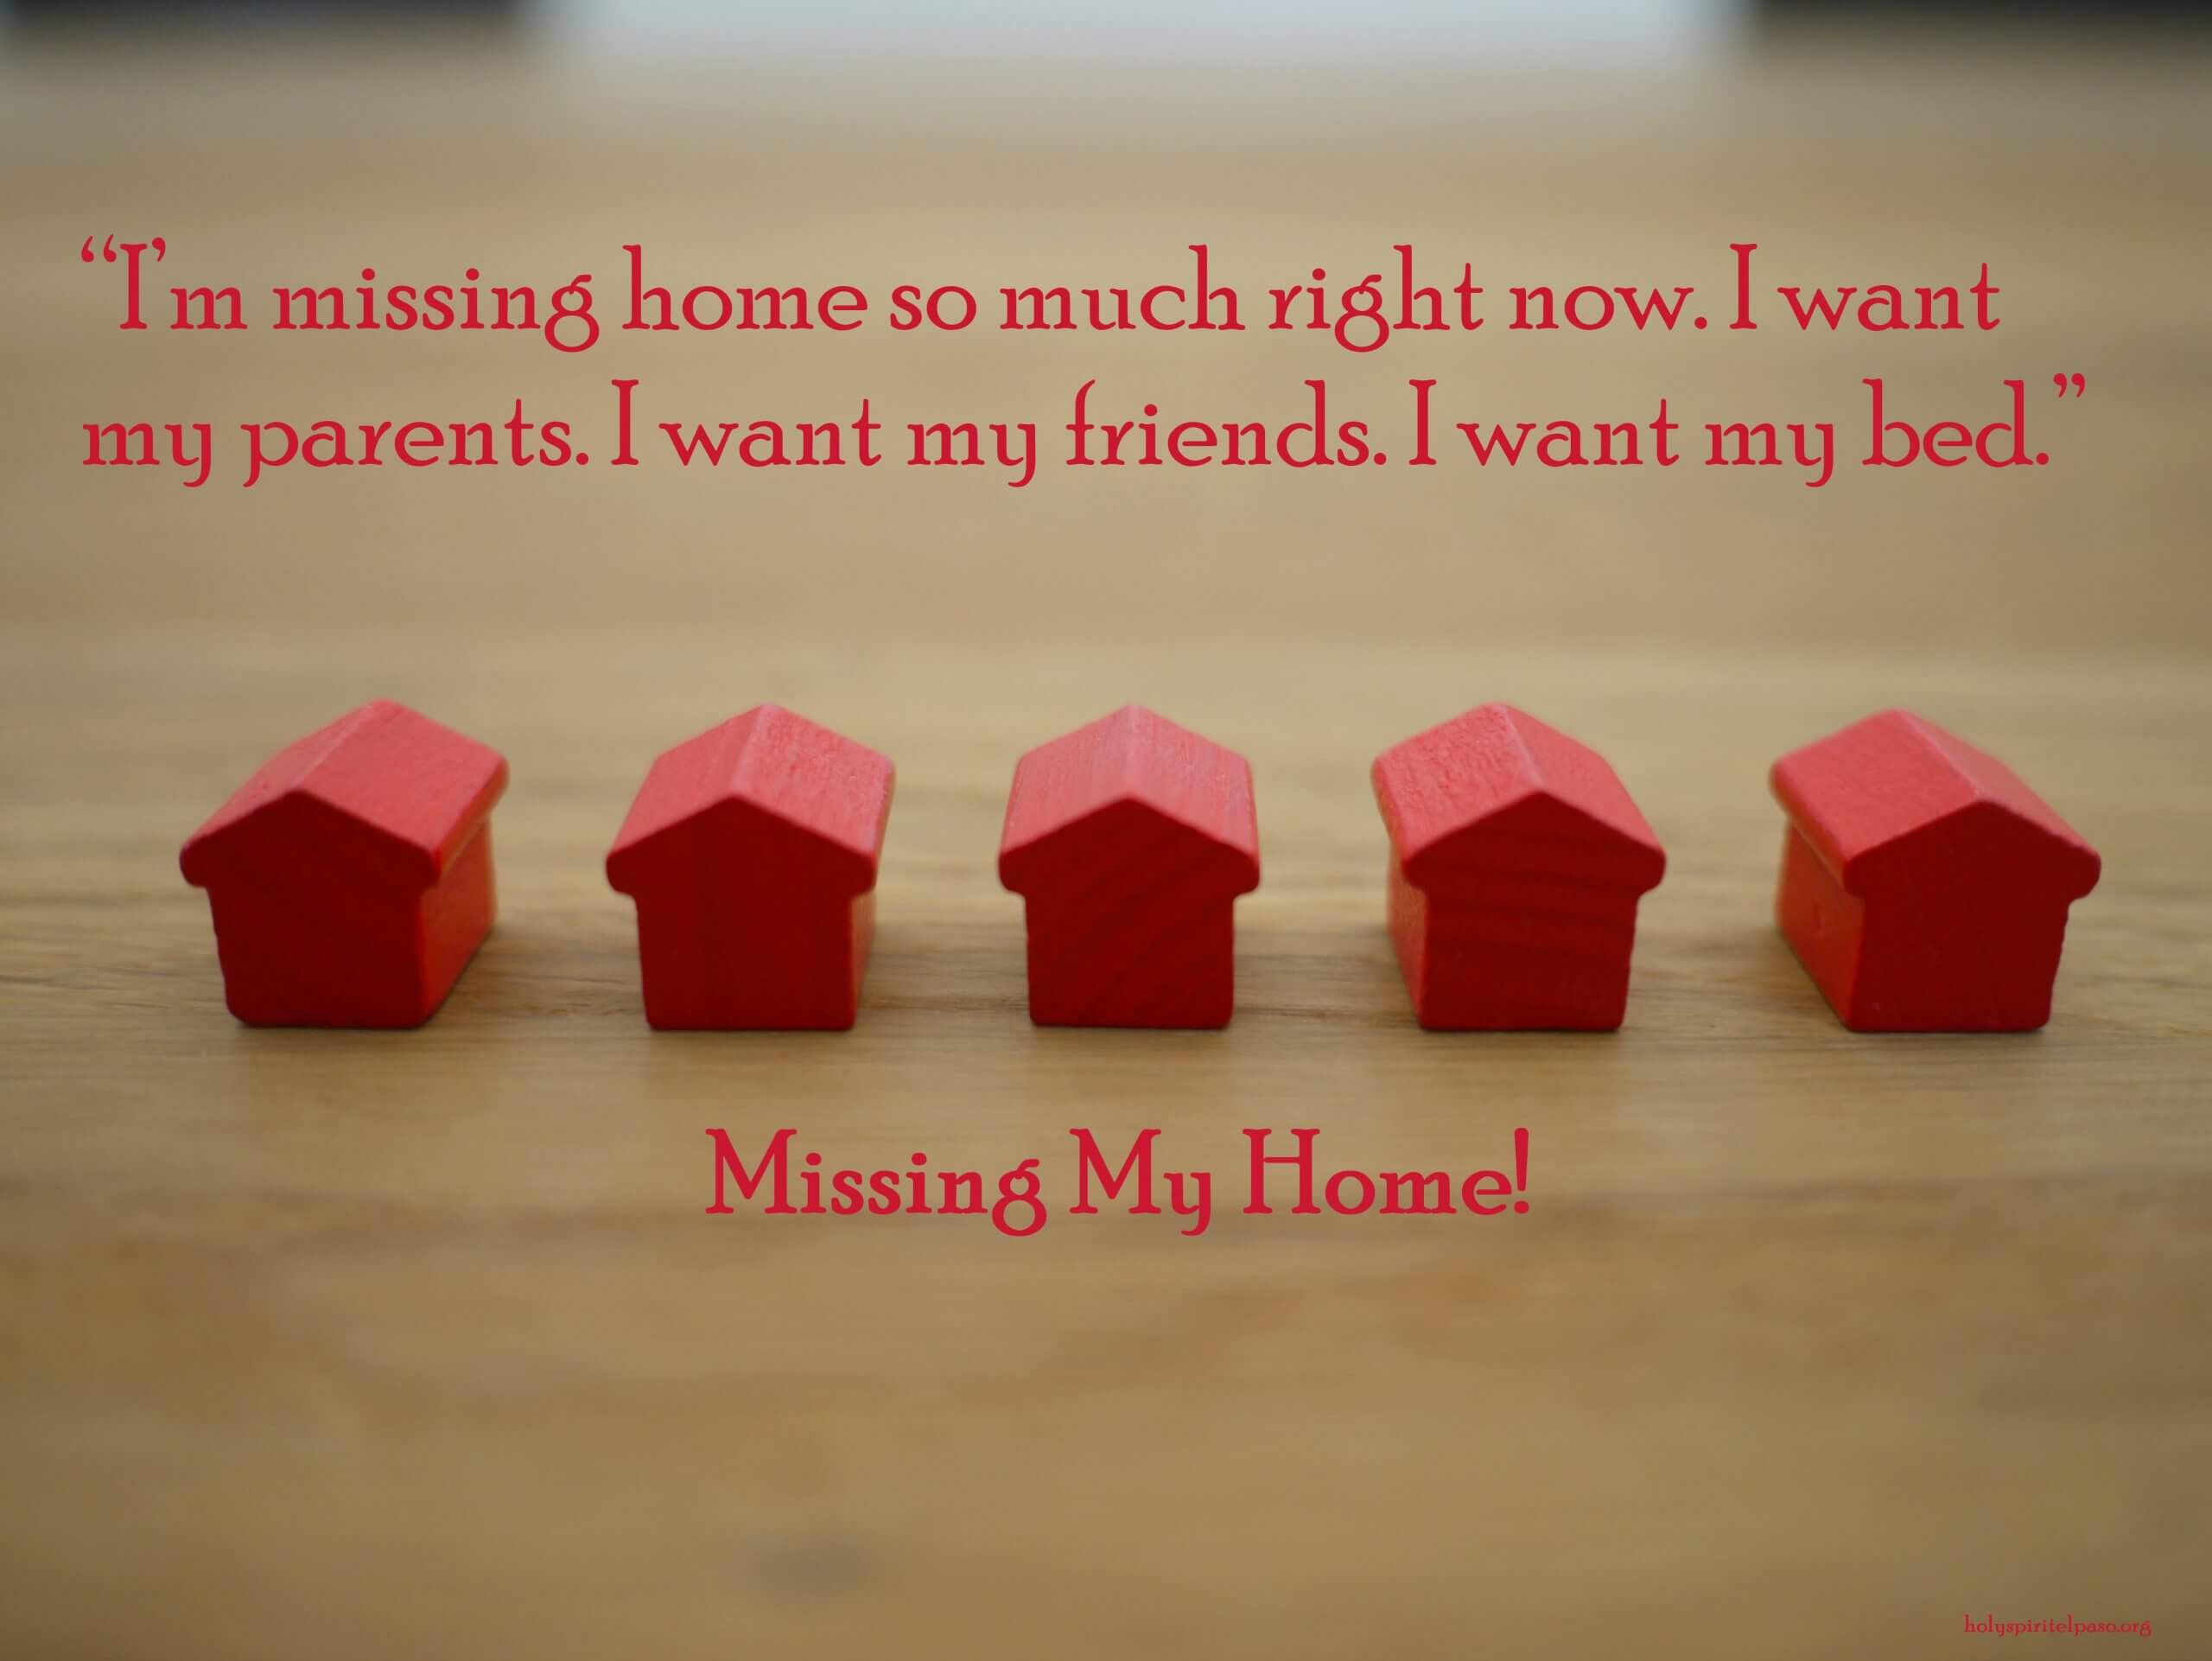 Missing Home Quotes - 63 Sayings About Missing Home